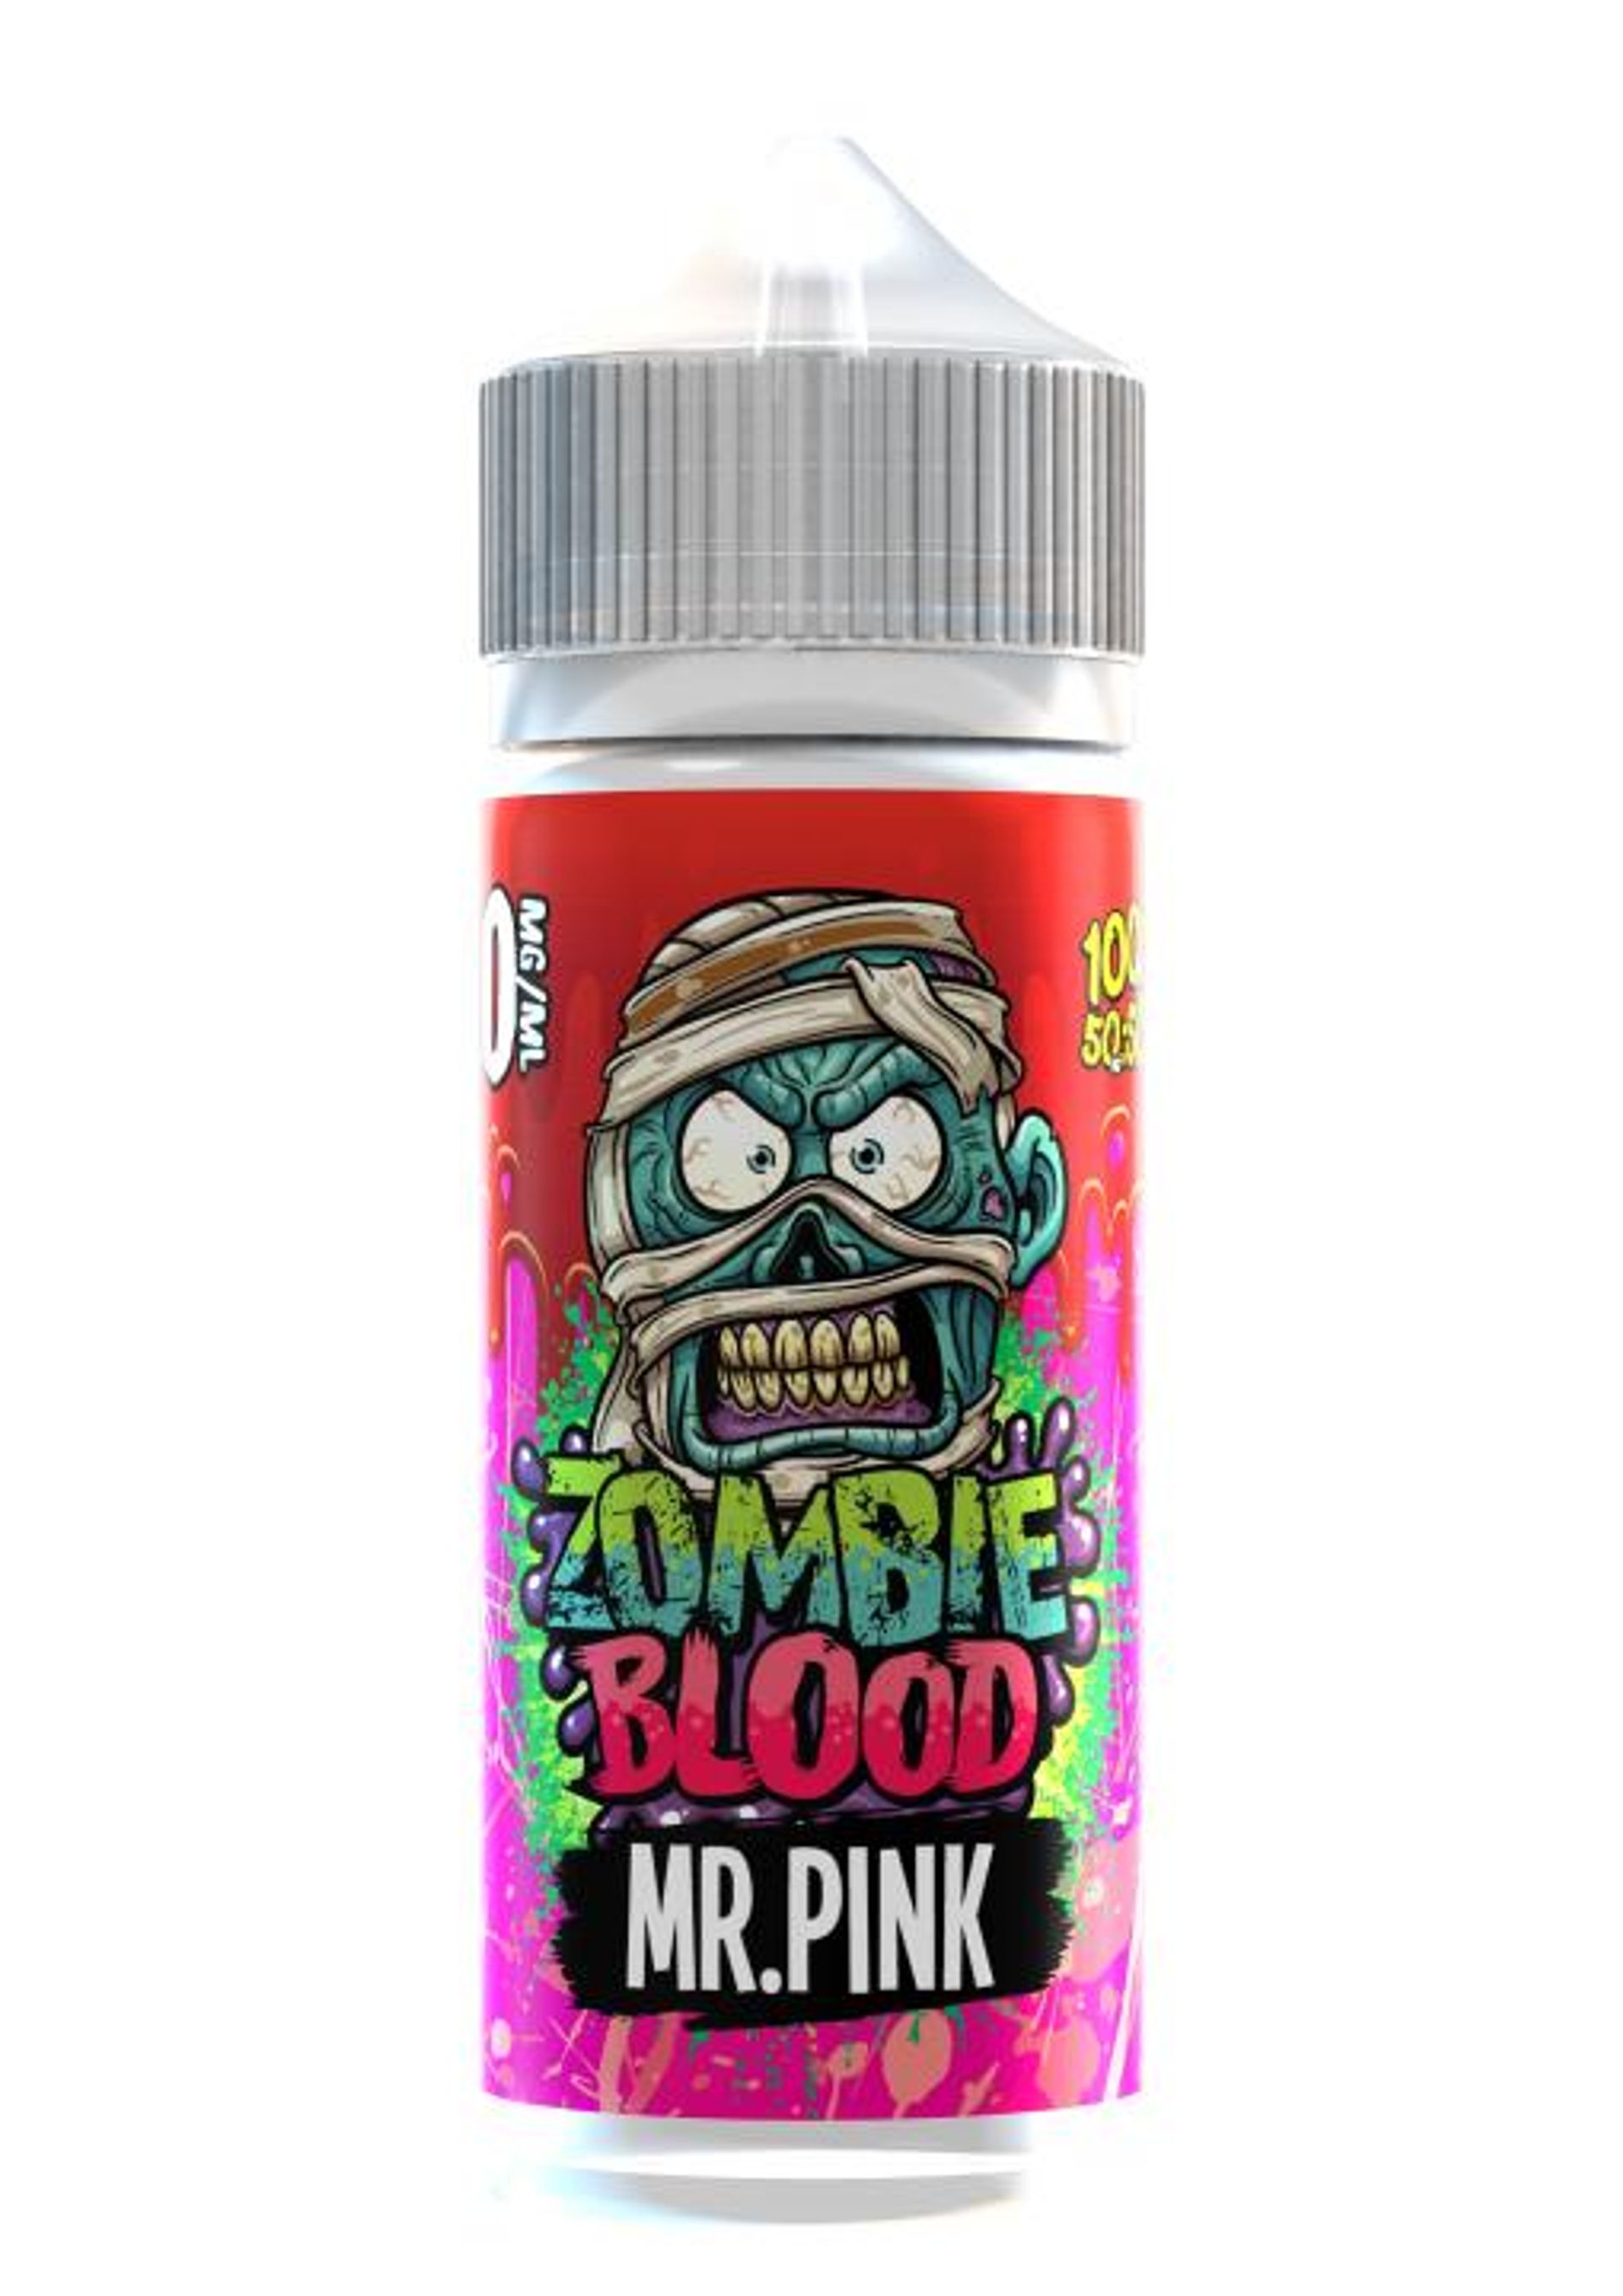 Image of Mr Pink by Zombie Blood